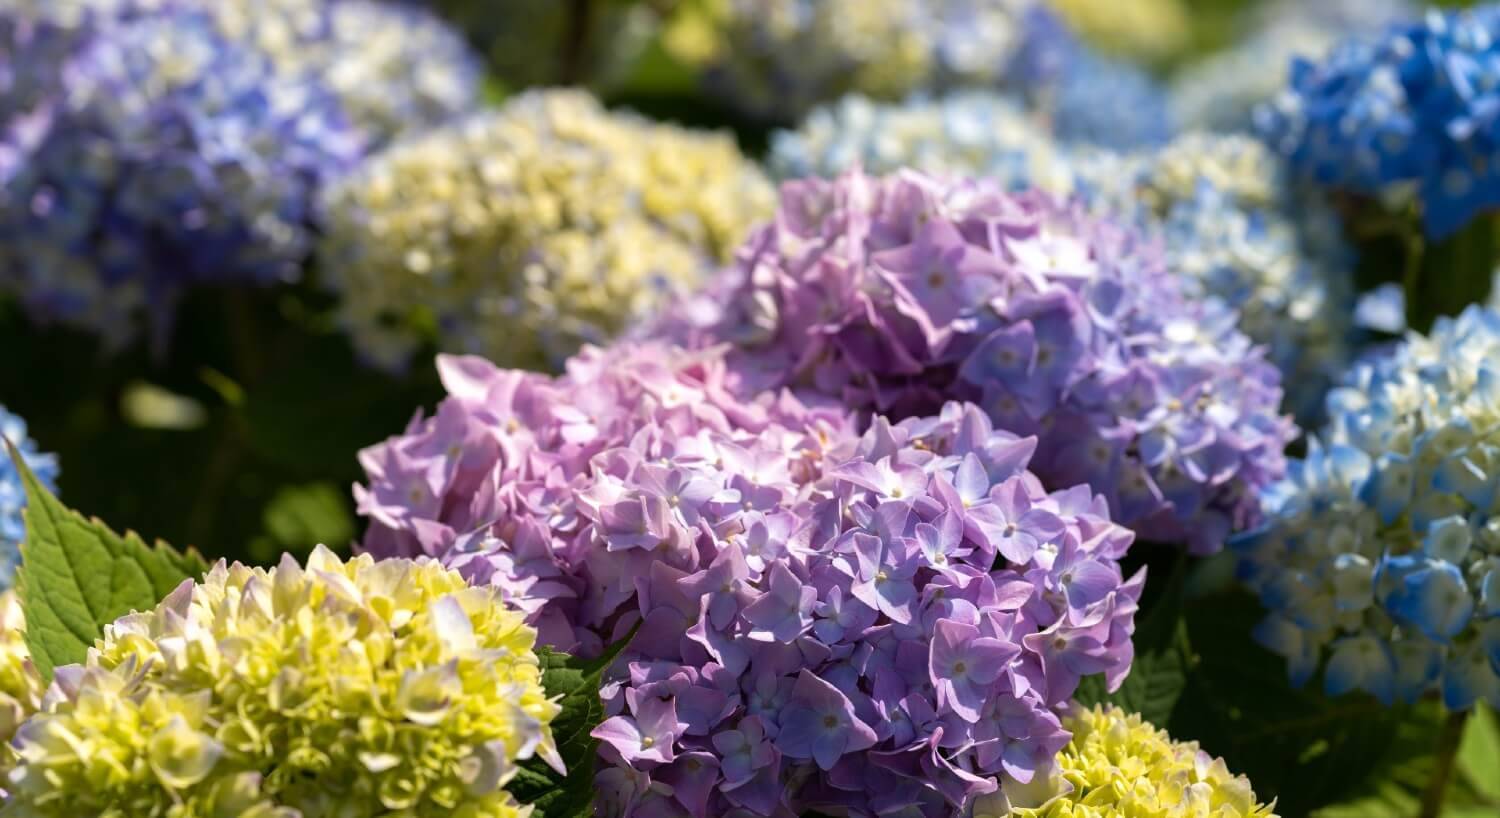 A group of green, blue and purple hydrangeas in sunlight